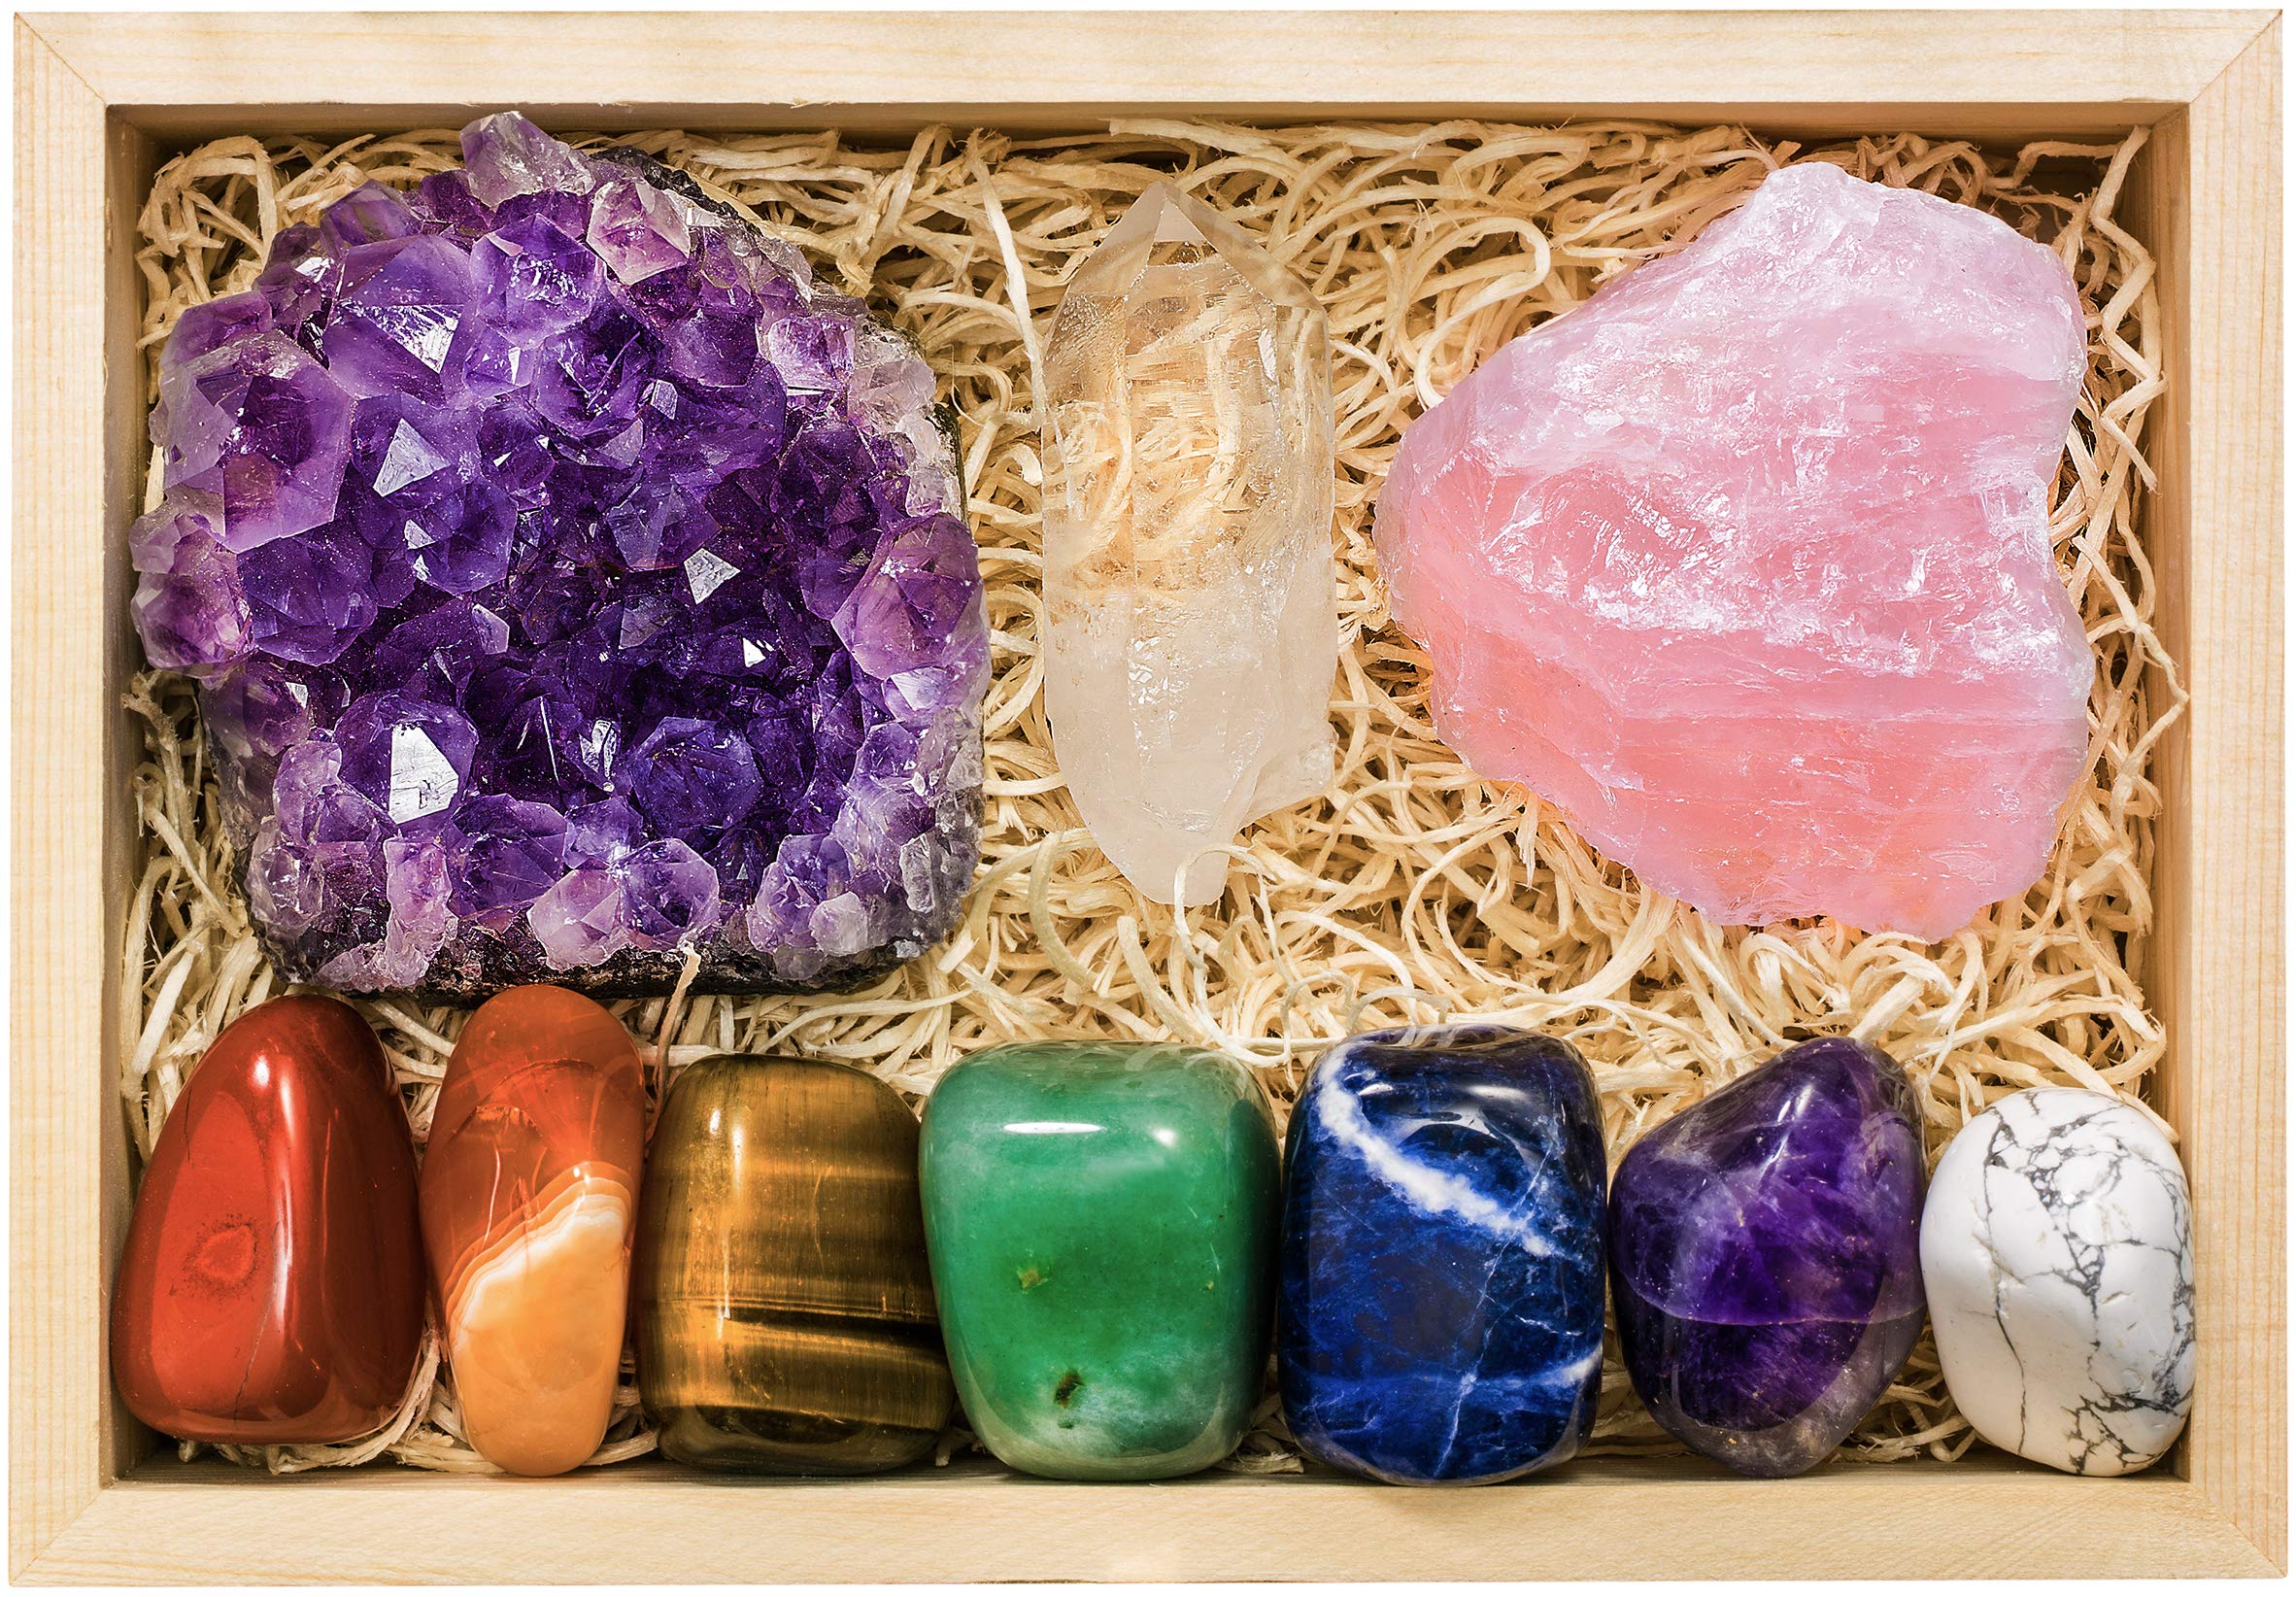 Using Crystals For Spiritual Healing And Growth - Choosing The Right Stones For Your Journey